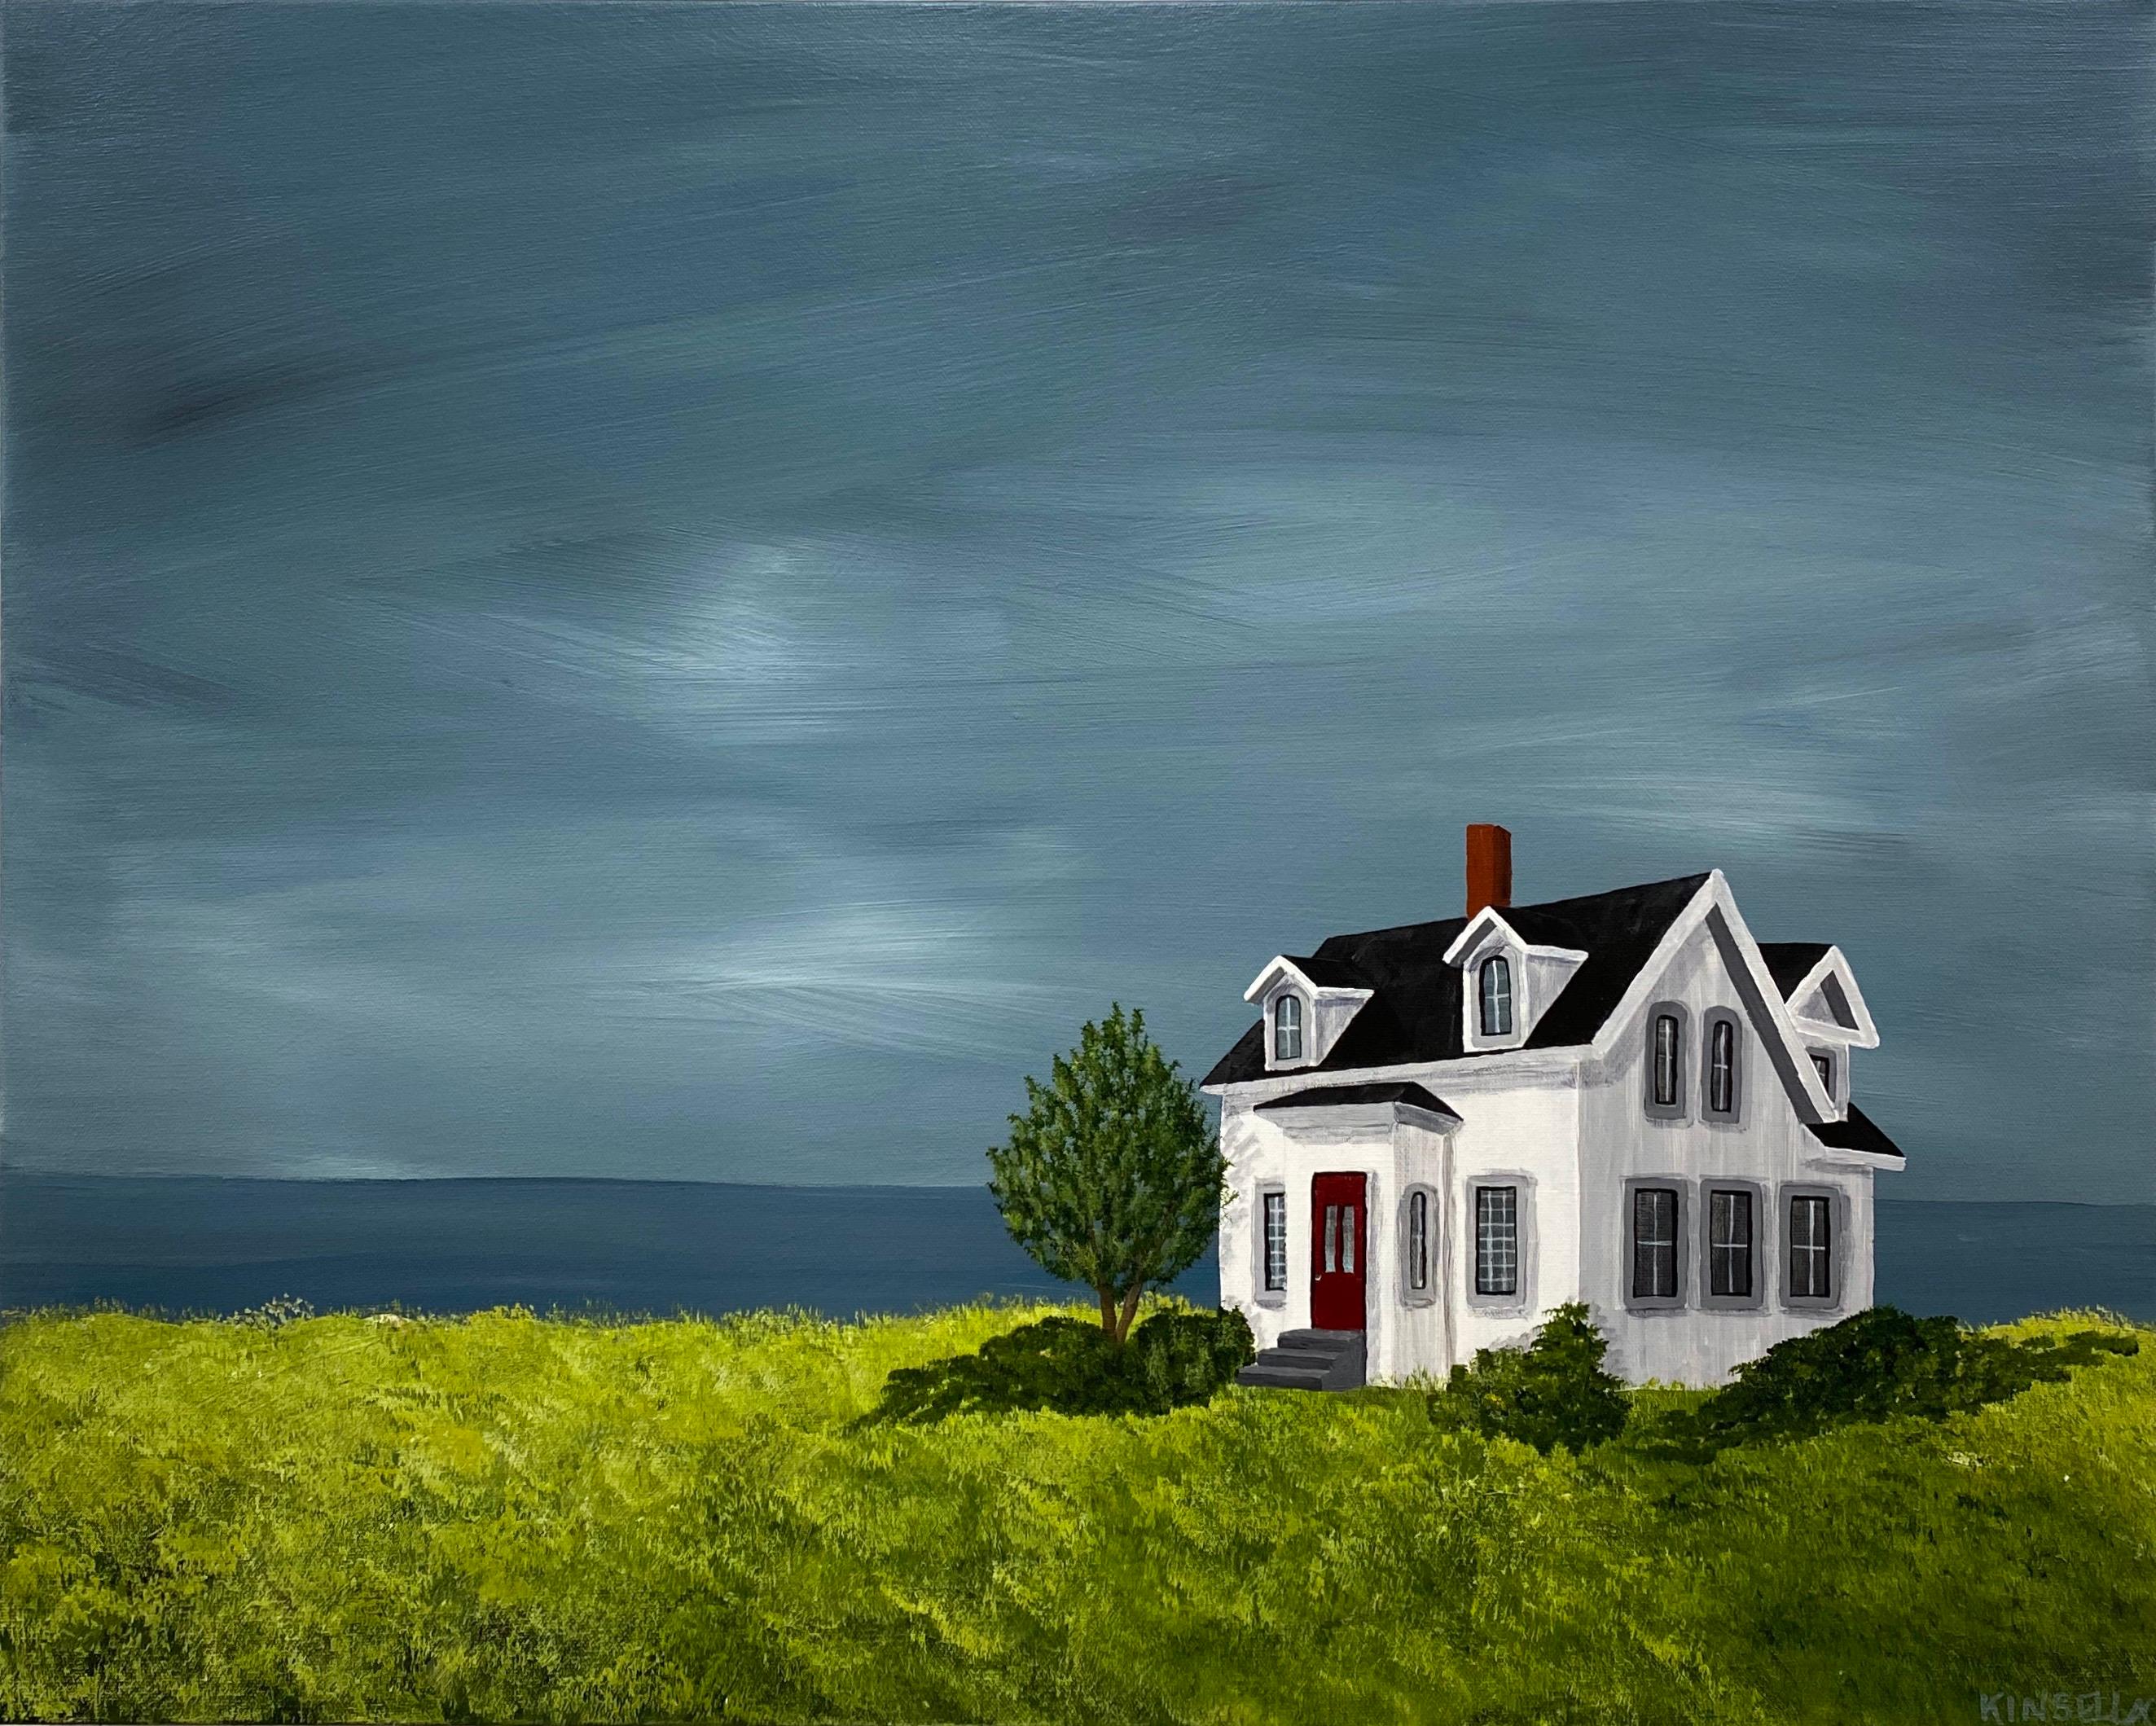 'Sanctuary Cottage' is a large contemporary acrylic on canvas painting of vertical format, created by American artist Susan Kinsella in 2020. Featuring a dramatic, luminous palette mostly made of blue, white, red and white tones. Reminding us of Old